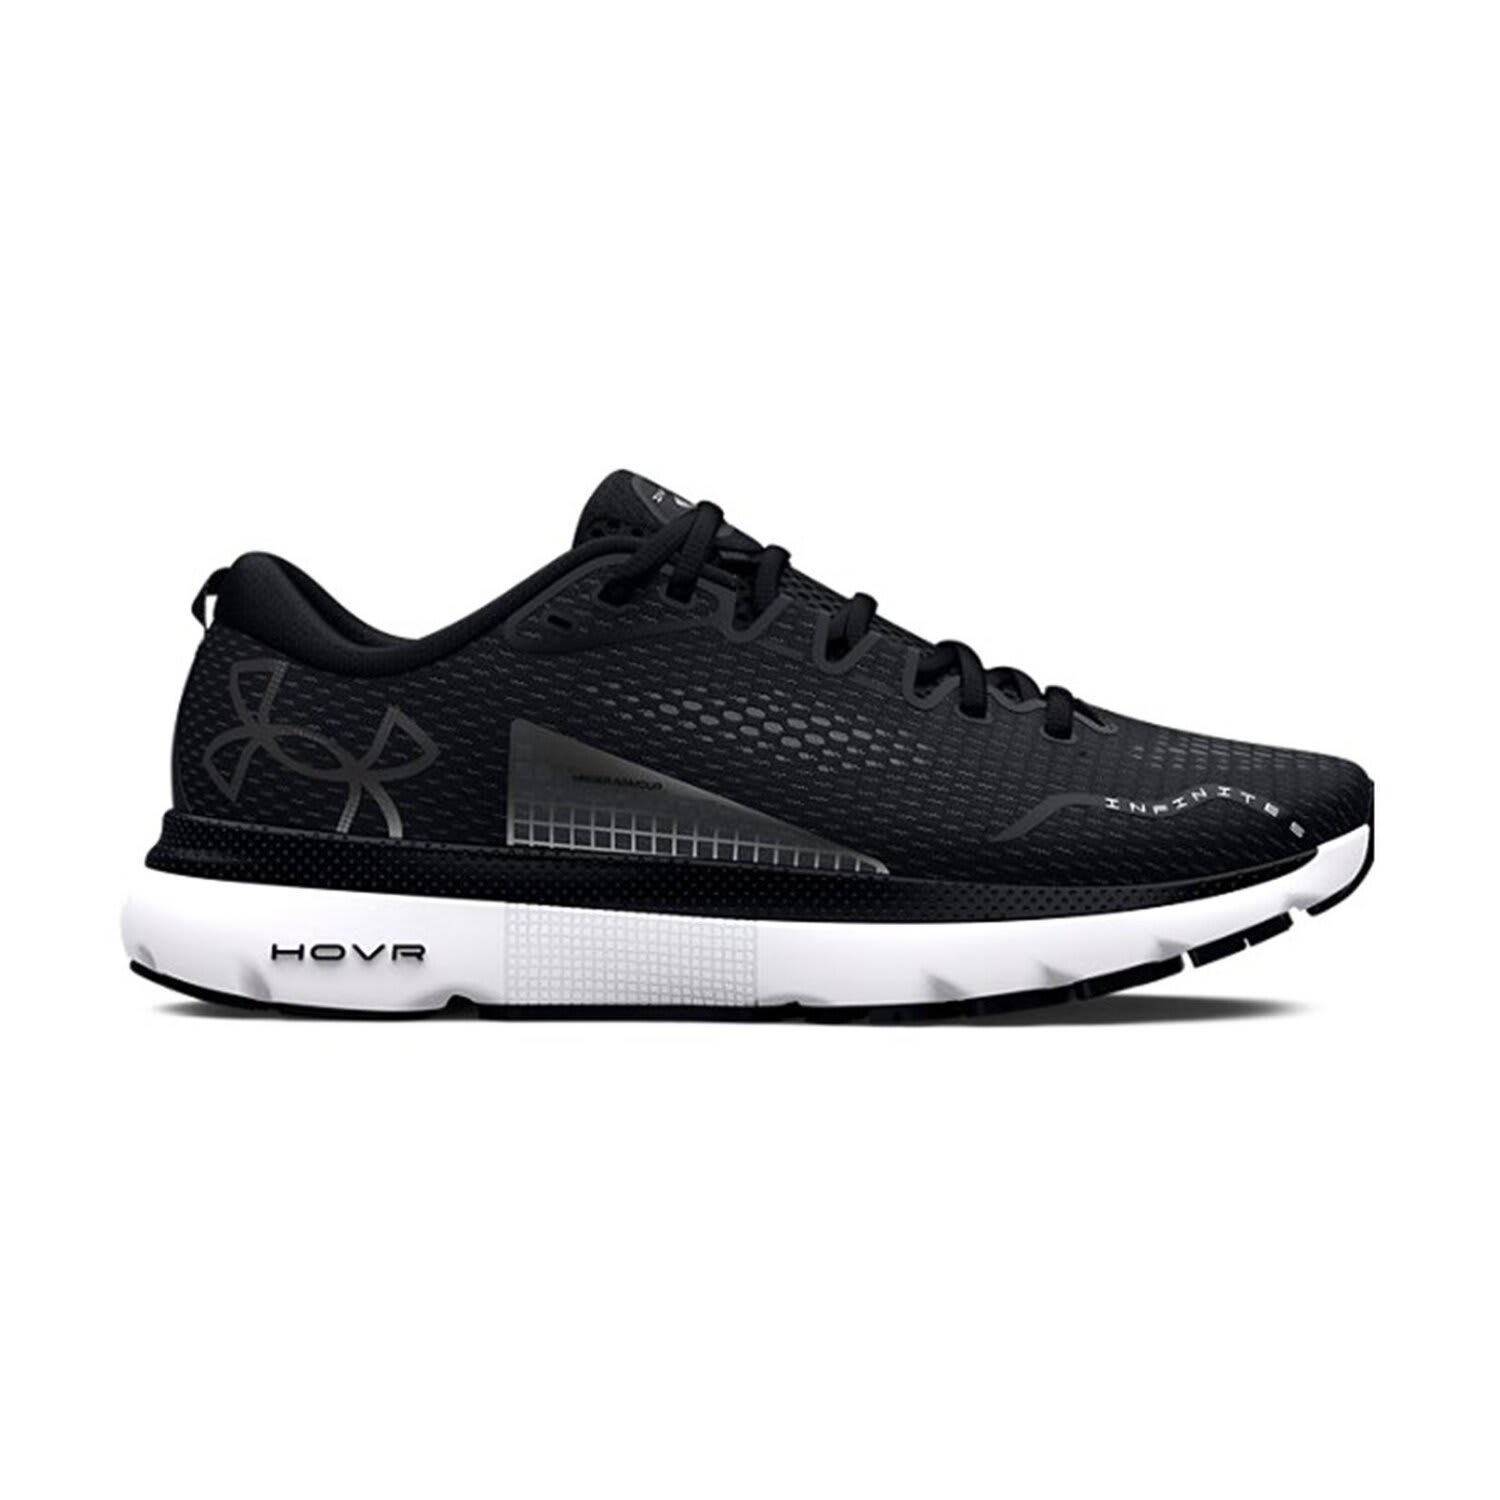 Under Armour Men's Hovr Infinite 5 Road Running Shoes | by Under Armour ...